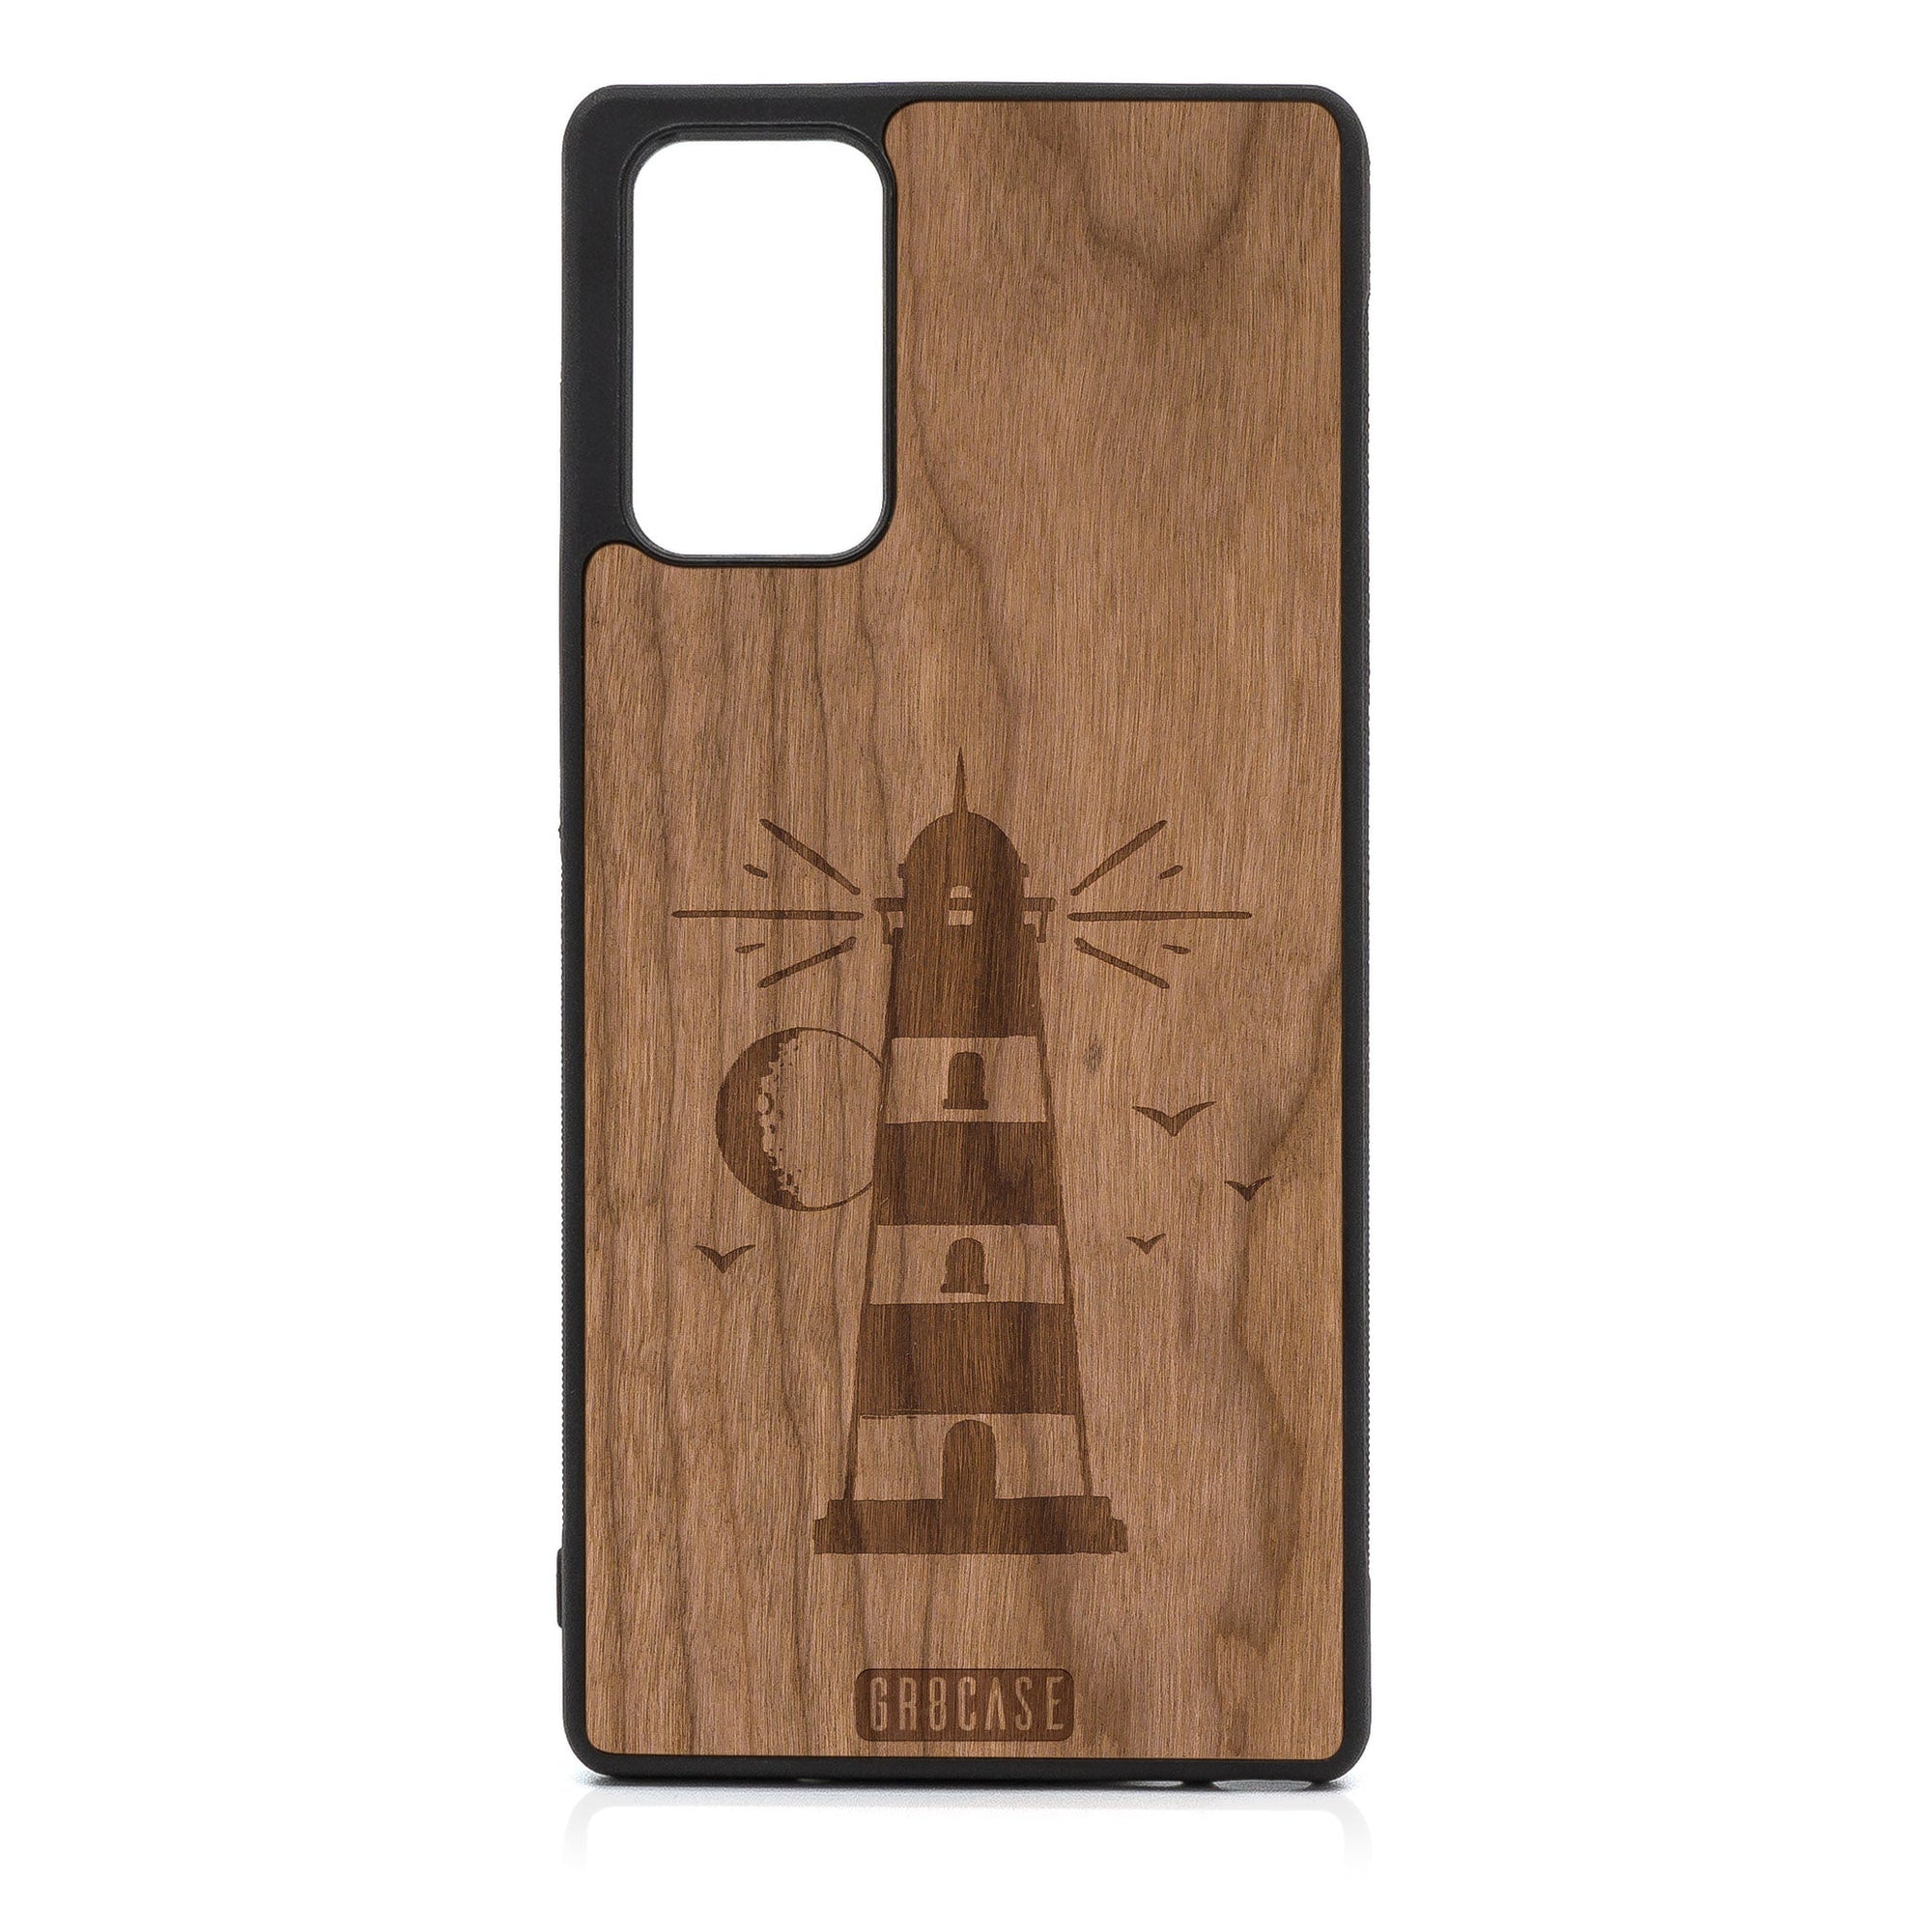 Midnight Lighthouse Design Wood Case For Samsung Galaxy A52 5G